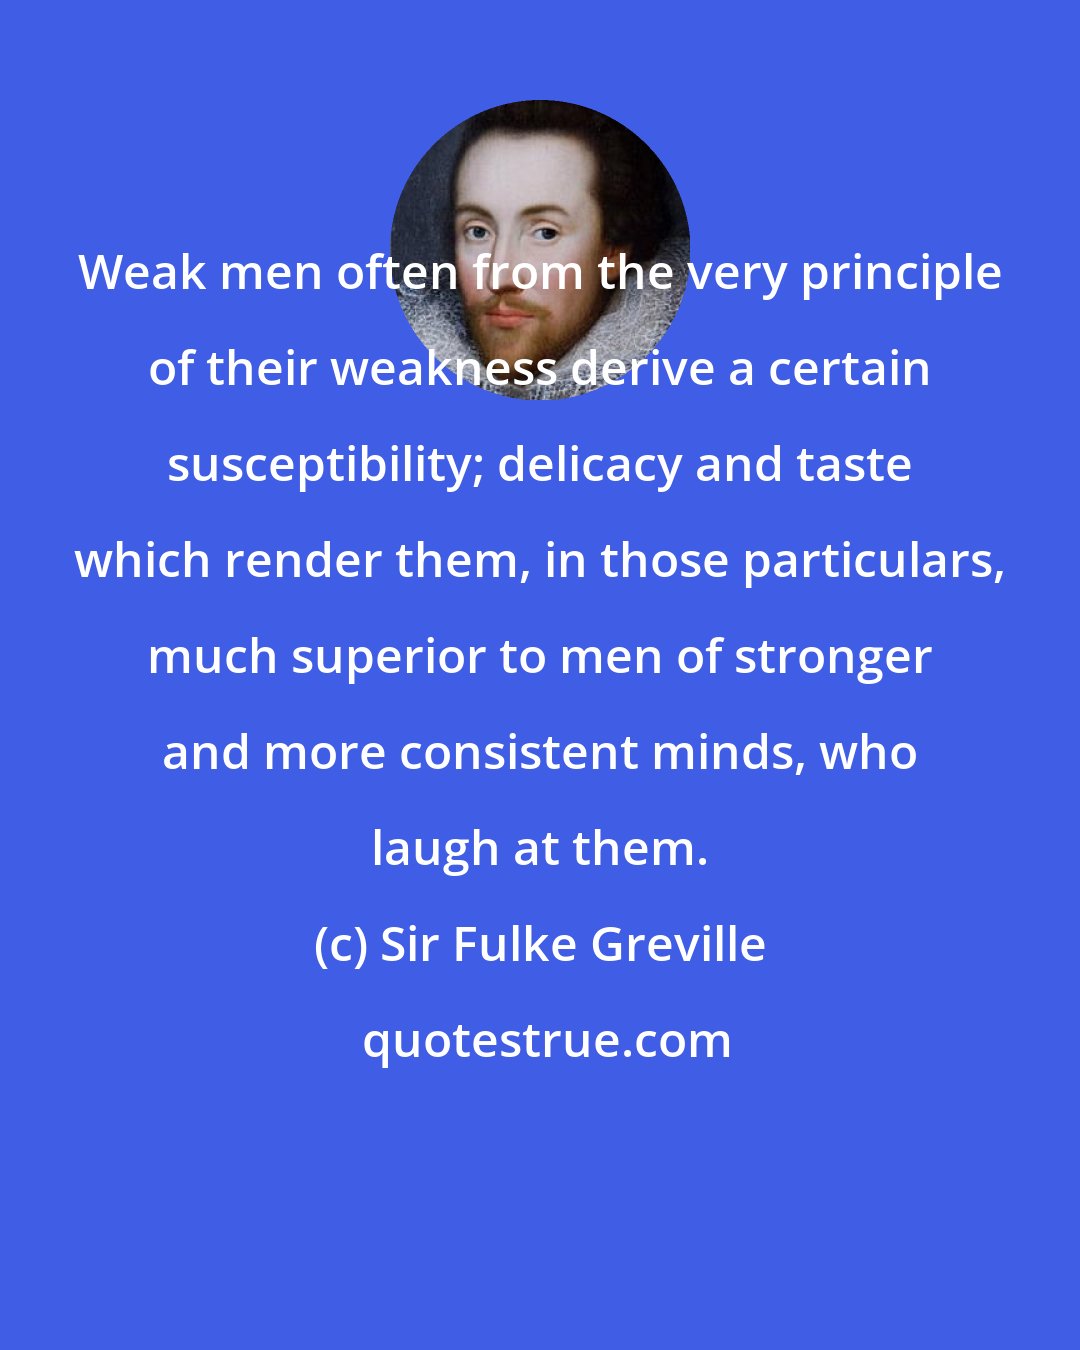 Sir Fulke Greville: Weak men often from the very principle of their weakness derive a certain susceptibility; delicacy and taste which render them, in those particulars, much superior to men of stronger and more consistent minds, who laugh at them.